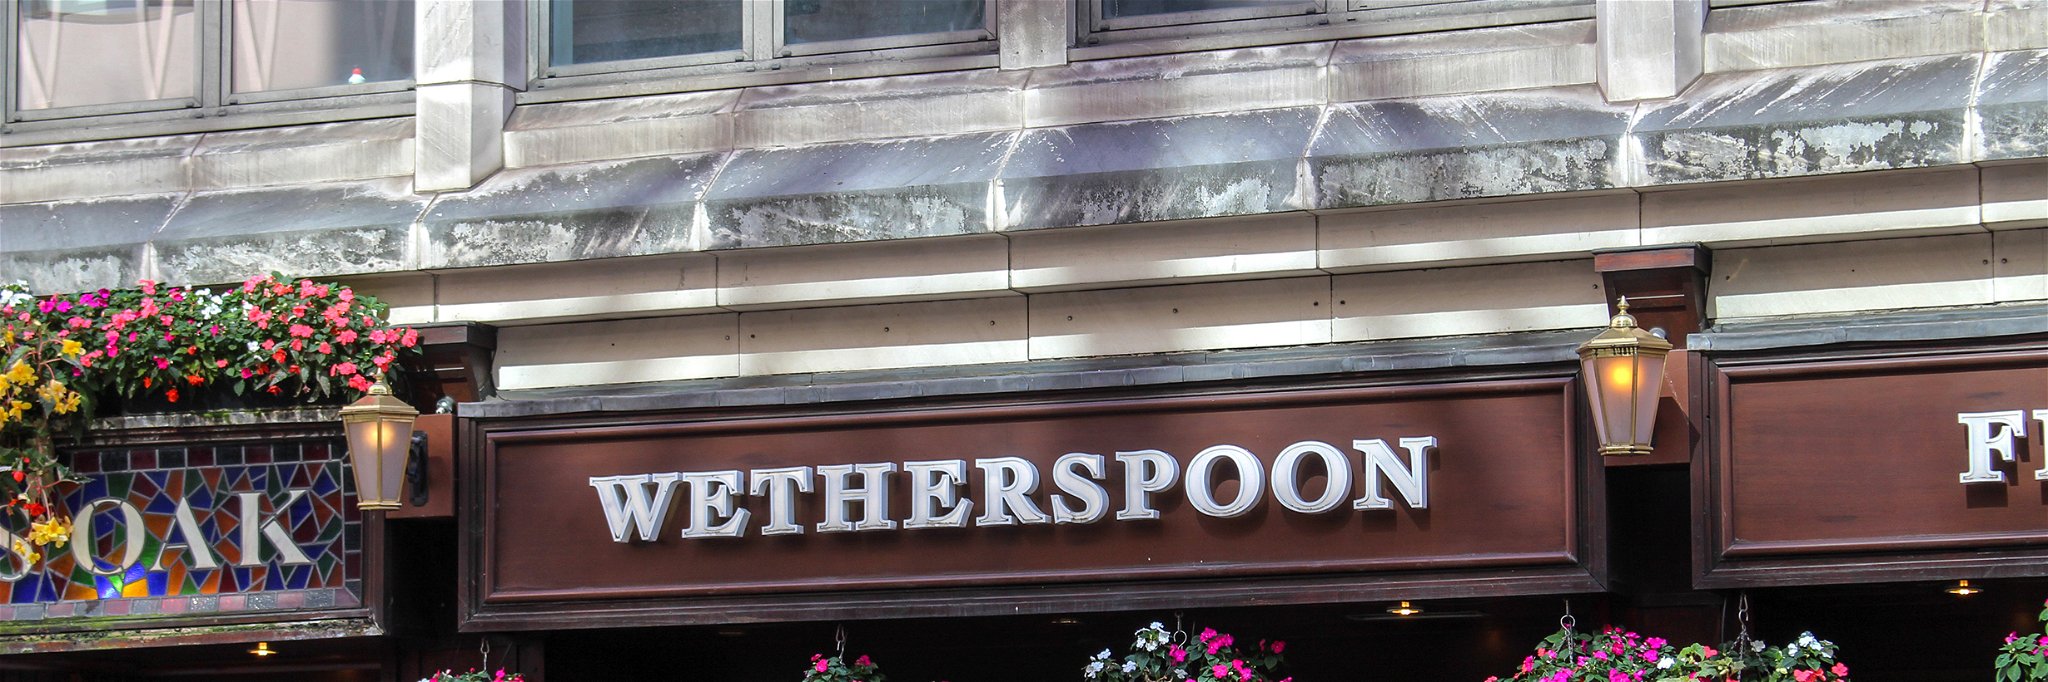 Wetherspoon pubs will continue to be operated until buyers can be found.